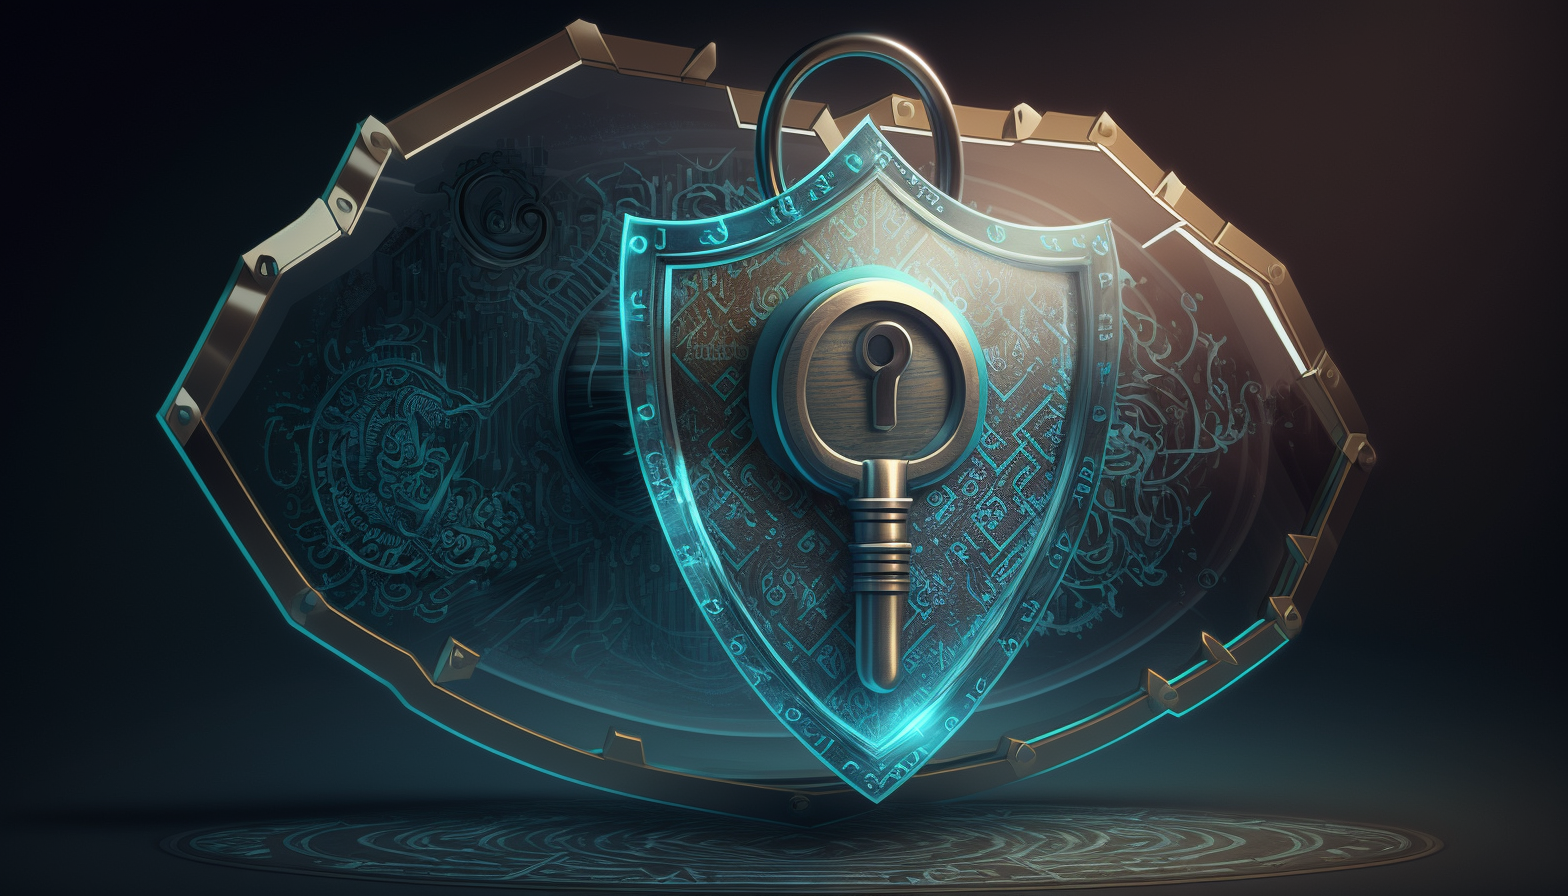 A shield with a lock and key symbolizes cybersecurity, with a magnifying glass over it representing risk management.